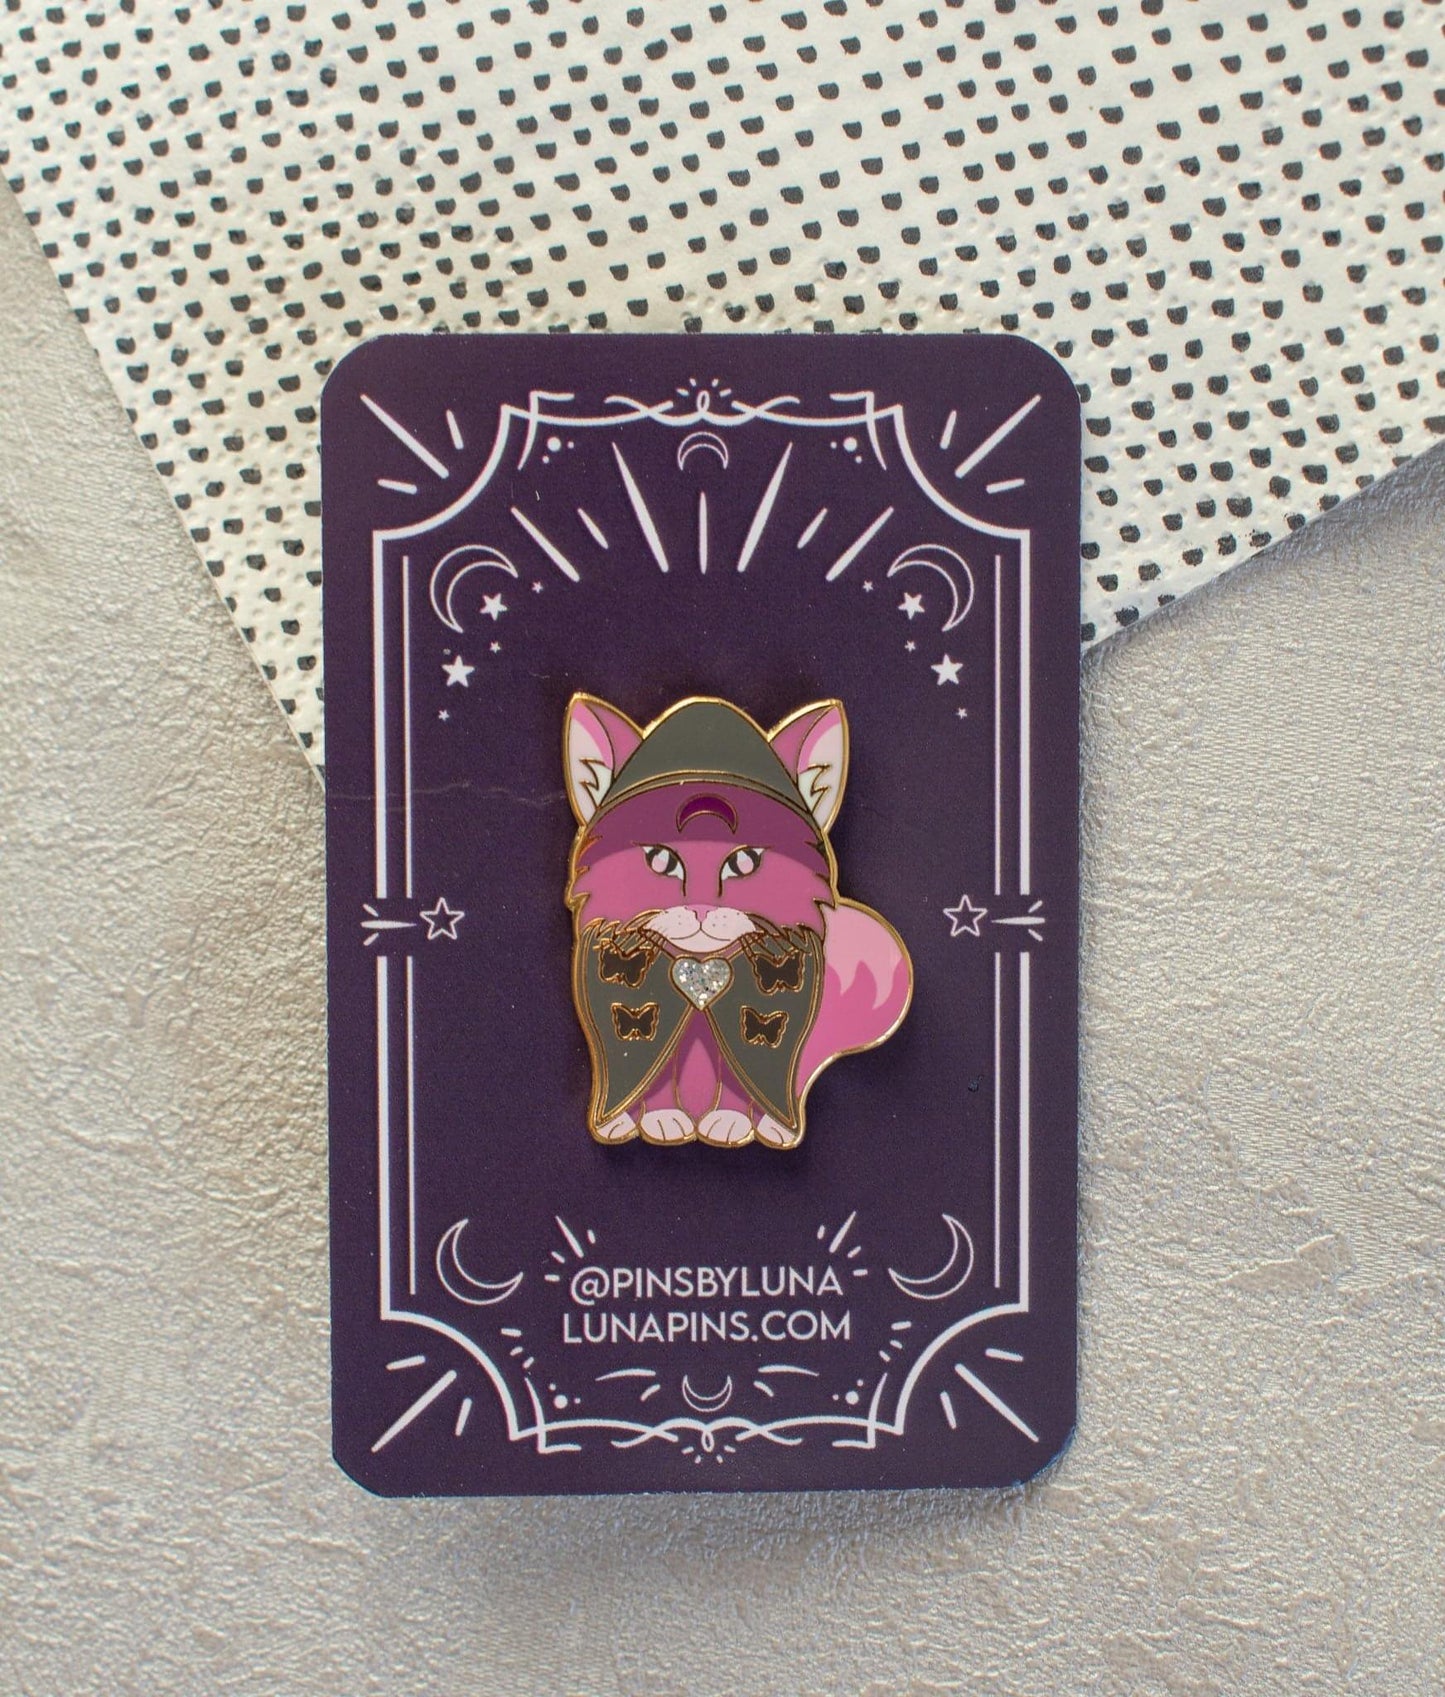 A head-on image of a purple cat enamel pin. The cat wears a dark grey cape with a hood and a silver glitter brooch in the centre. The cats paws and inner ears are a lighter purple and it has an upside down crescent moon in dark pin on its forehead.